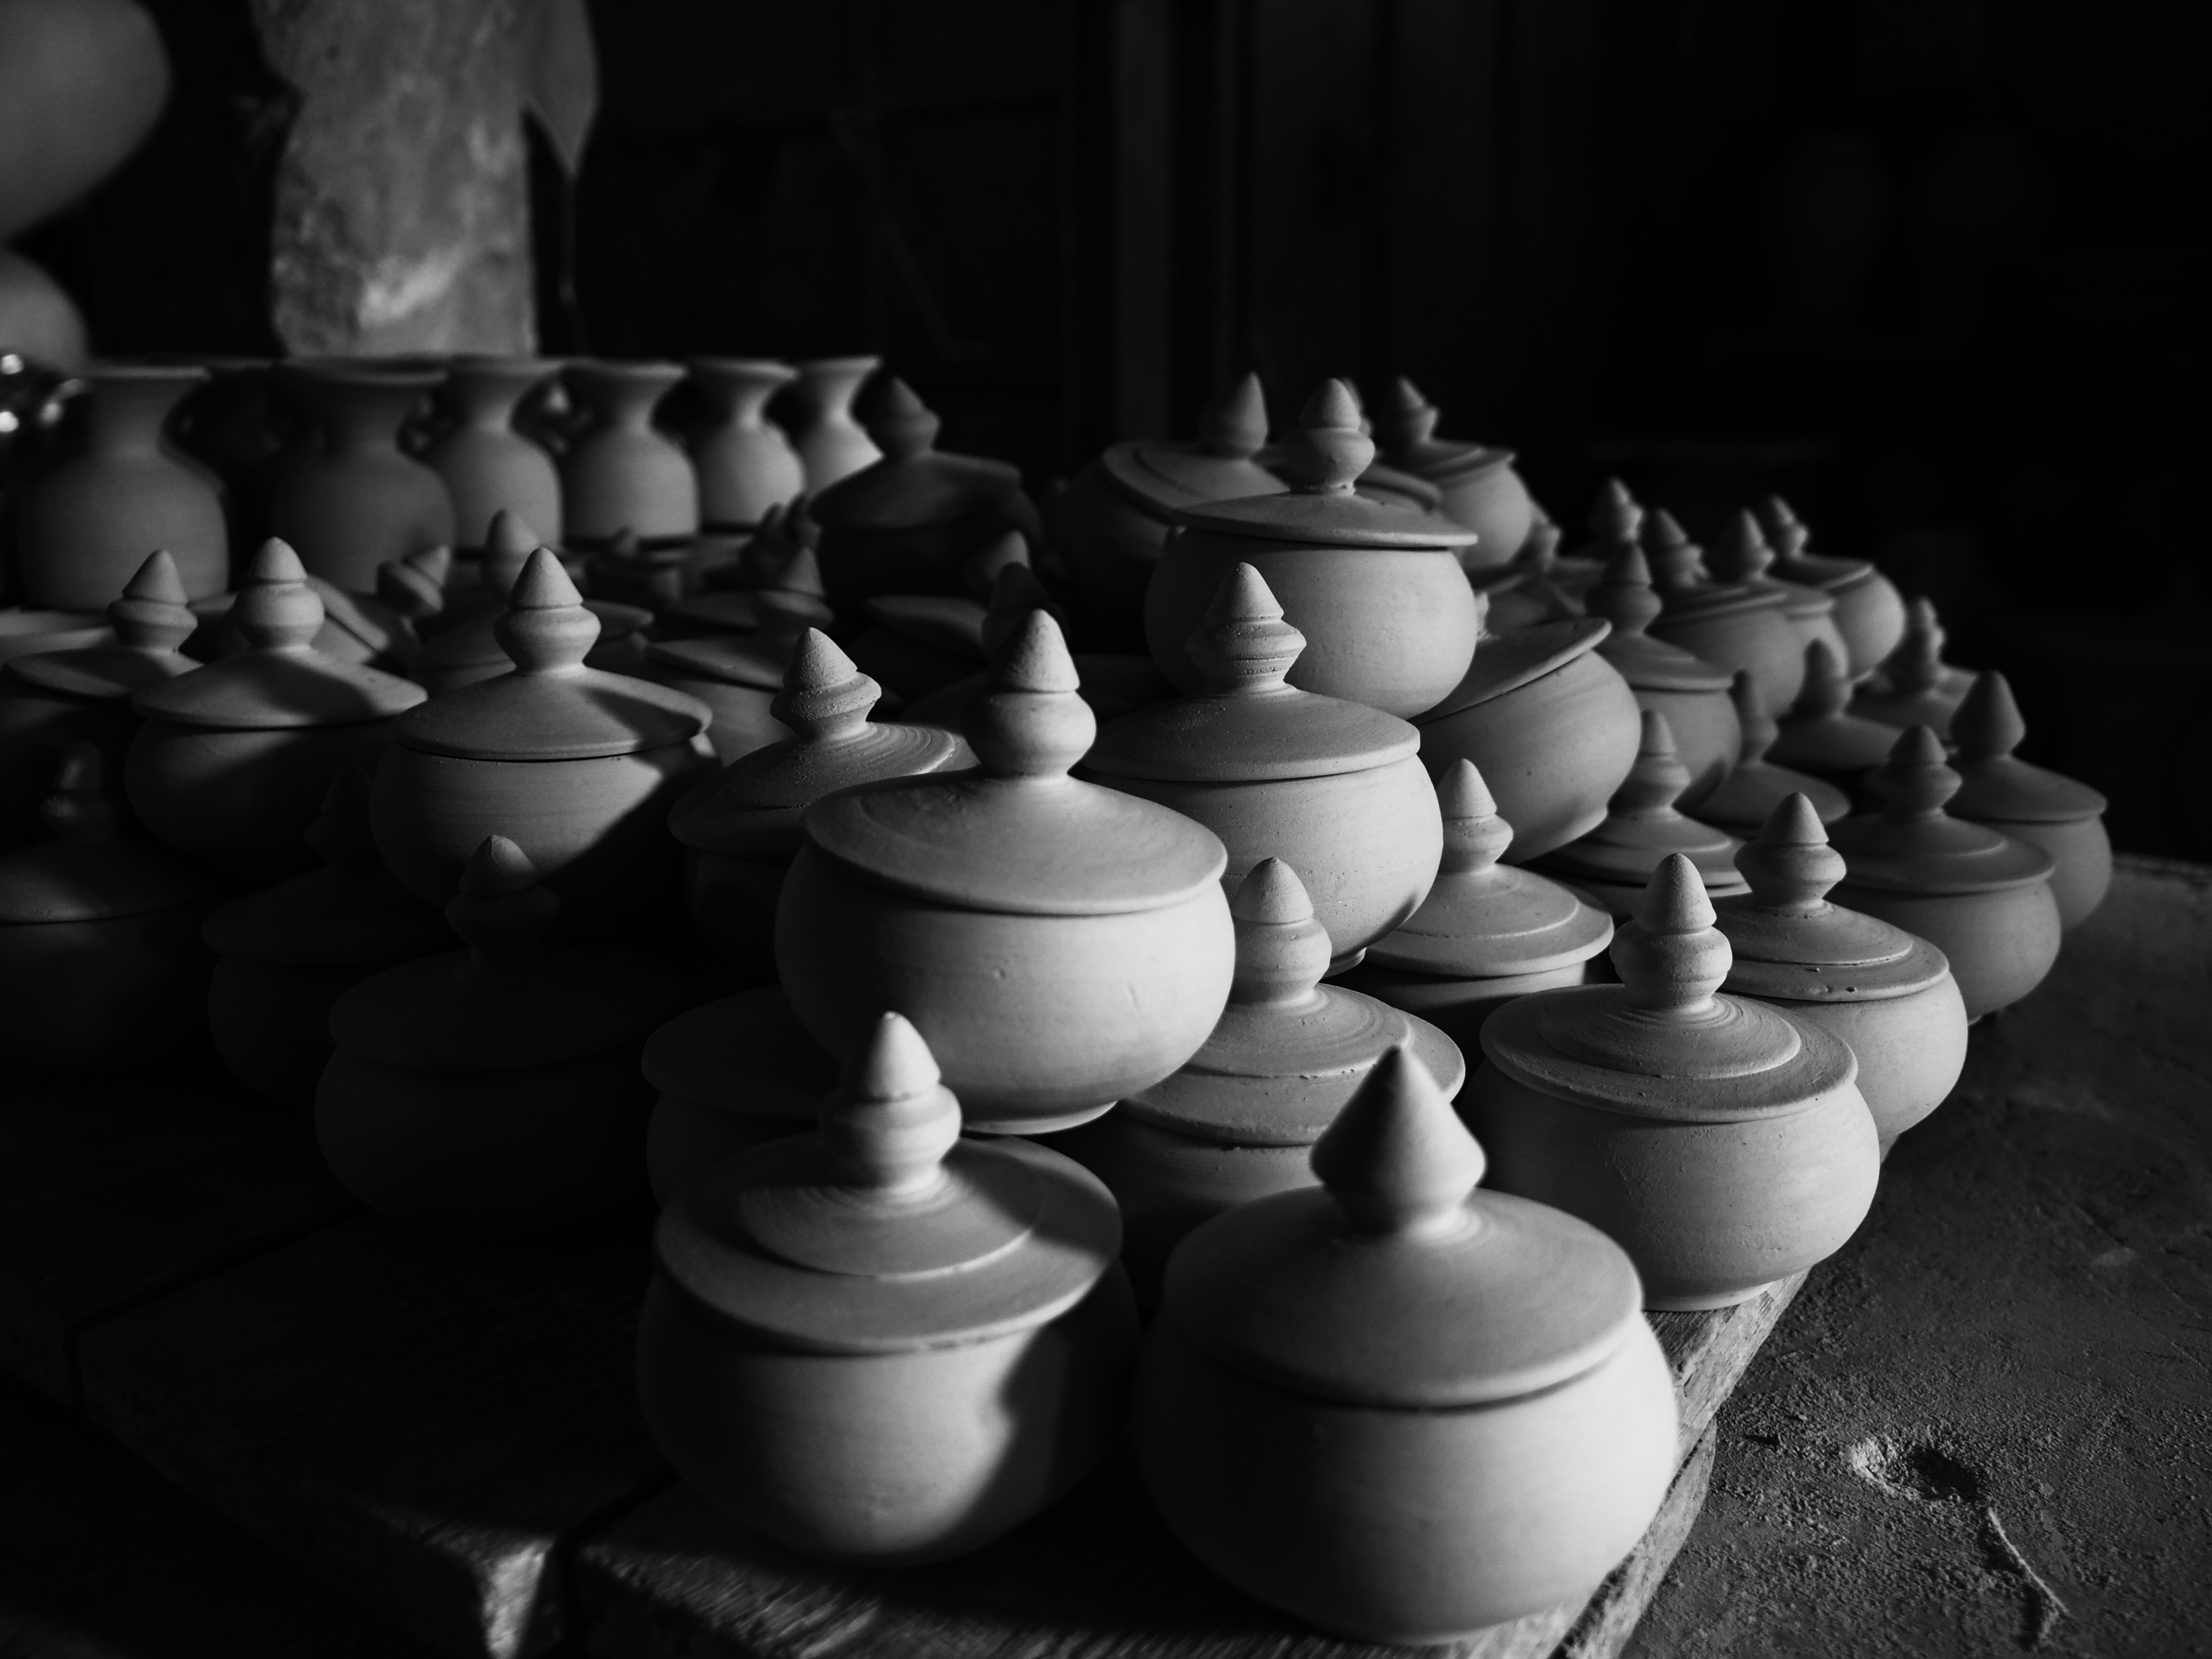 Pottery - Fes. This magically aesthetic art is a treasure to come across but watching the potters at work is a sight I will never forget.